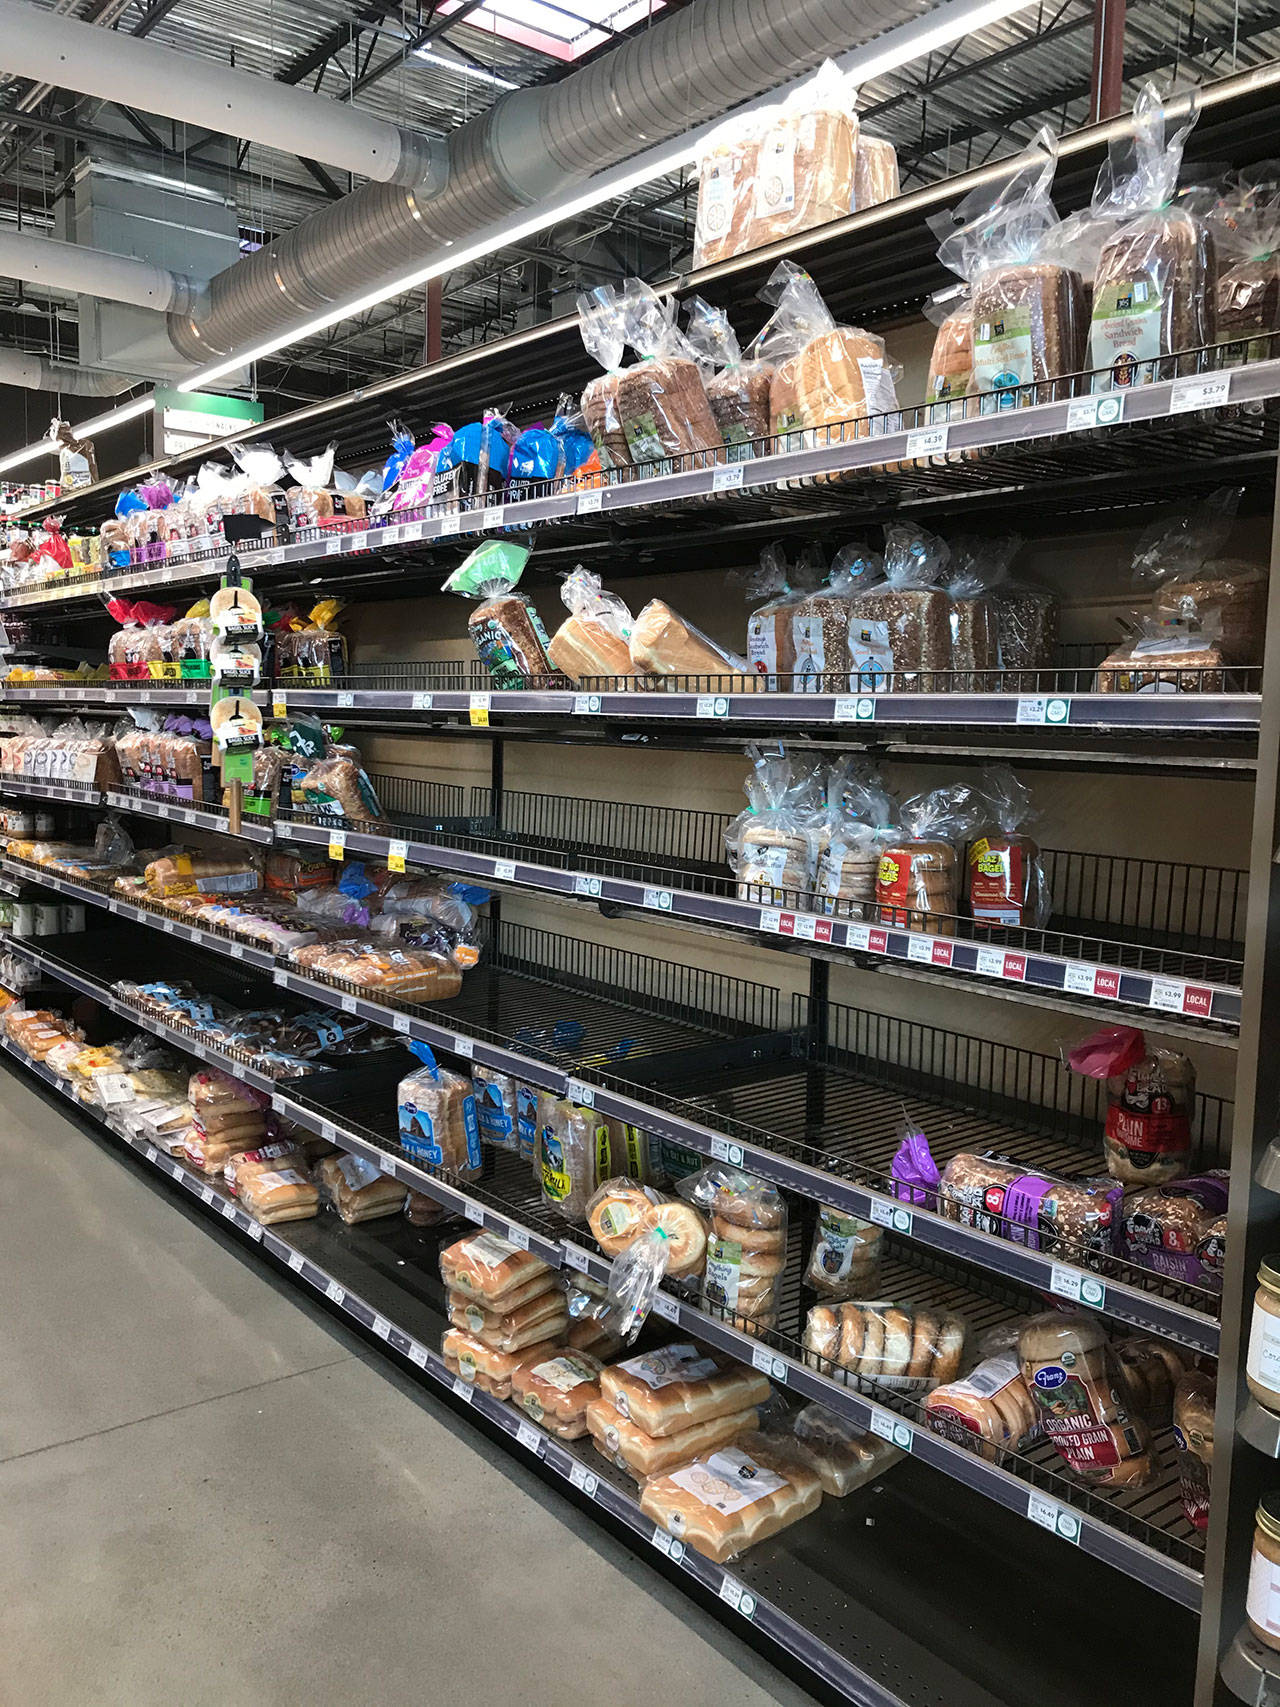 Sections of the bread aisle at the Whole Foods in Kirkland were cleared out on March 15. Samantha Pak/staff photo